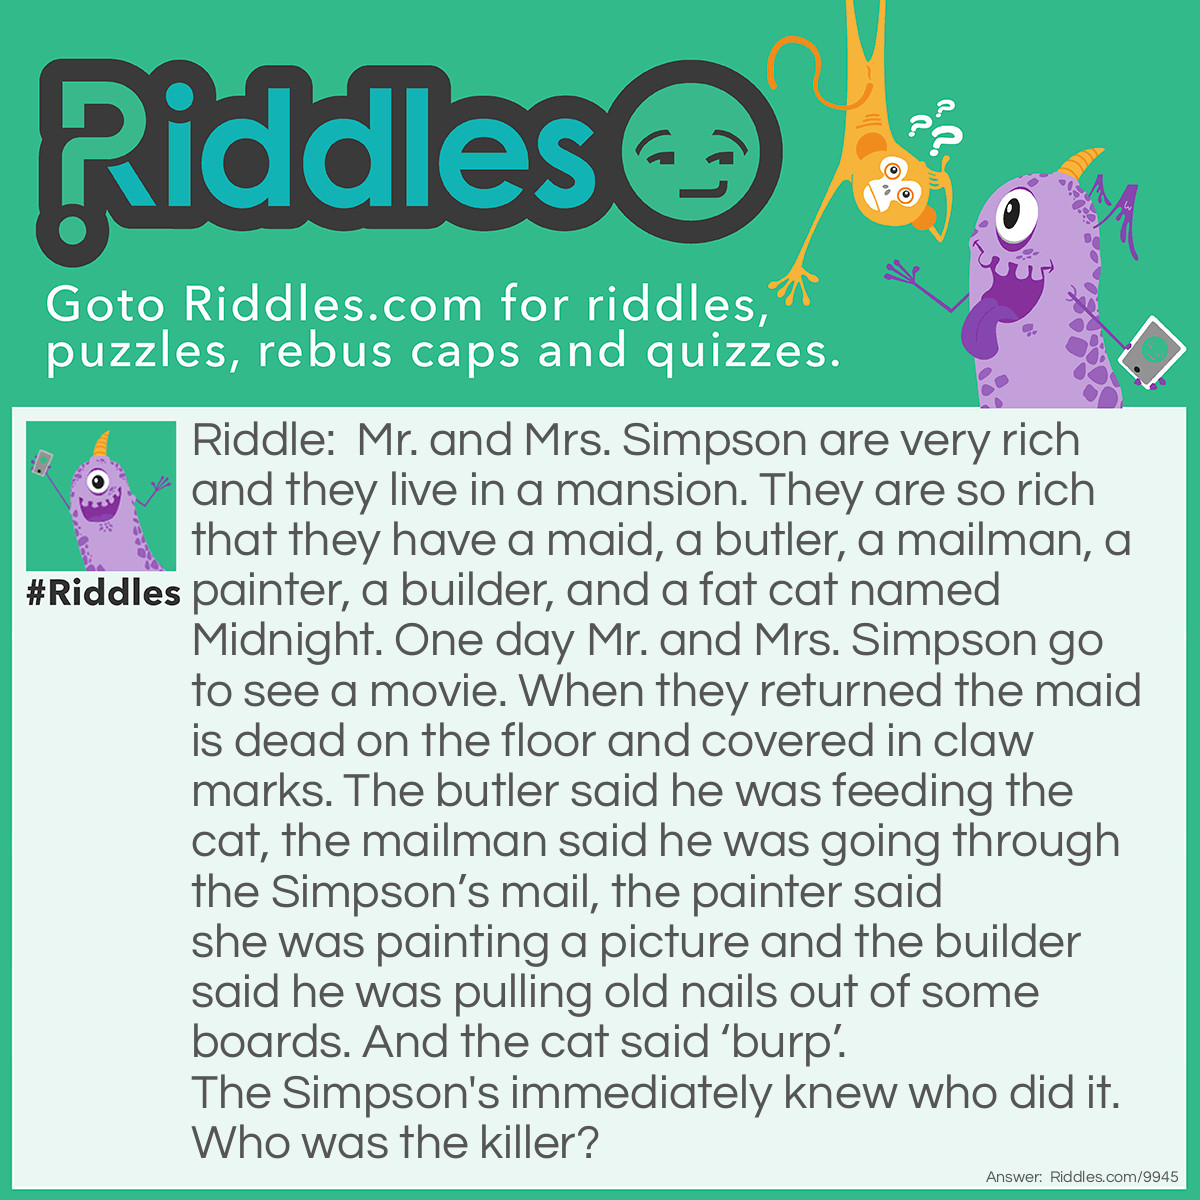 Riddle: Mr. and Mrs. Simpson are very rich and they live in a mansion. They are so rich that they have a maid, a butler, a mailman, a painter, a builder, and a fat cat named Midnight. One day Mr. and Mrs. Simpson go to see a movie. When they returned the maid is dead on the floor and covered in claw marks. The butler said he was feeding the cat, the mailman said he was going through the Simpson's mail, the painter said she was painting a picture and the builder said he was pulling old nails out of some boards. And the cat said 'burp'. The Simpson's immediately knew who did it. Who was the killer? Answer: The killer was the builder. Think, I never said it was cat claws. The back of a hammer that is used to pull out nails is sometimes called a claw. ;)